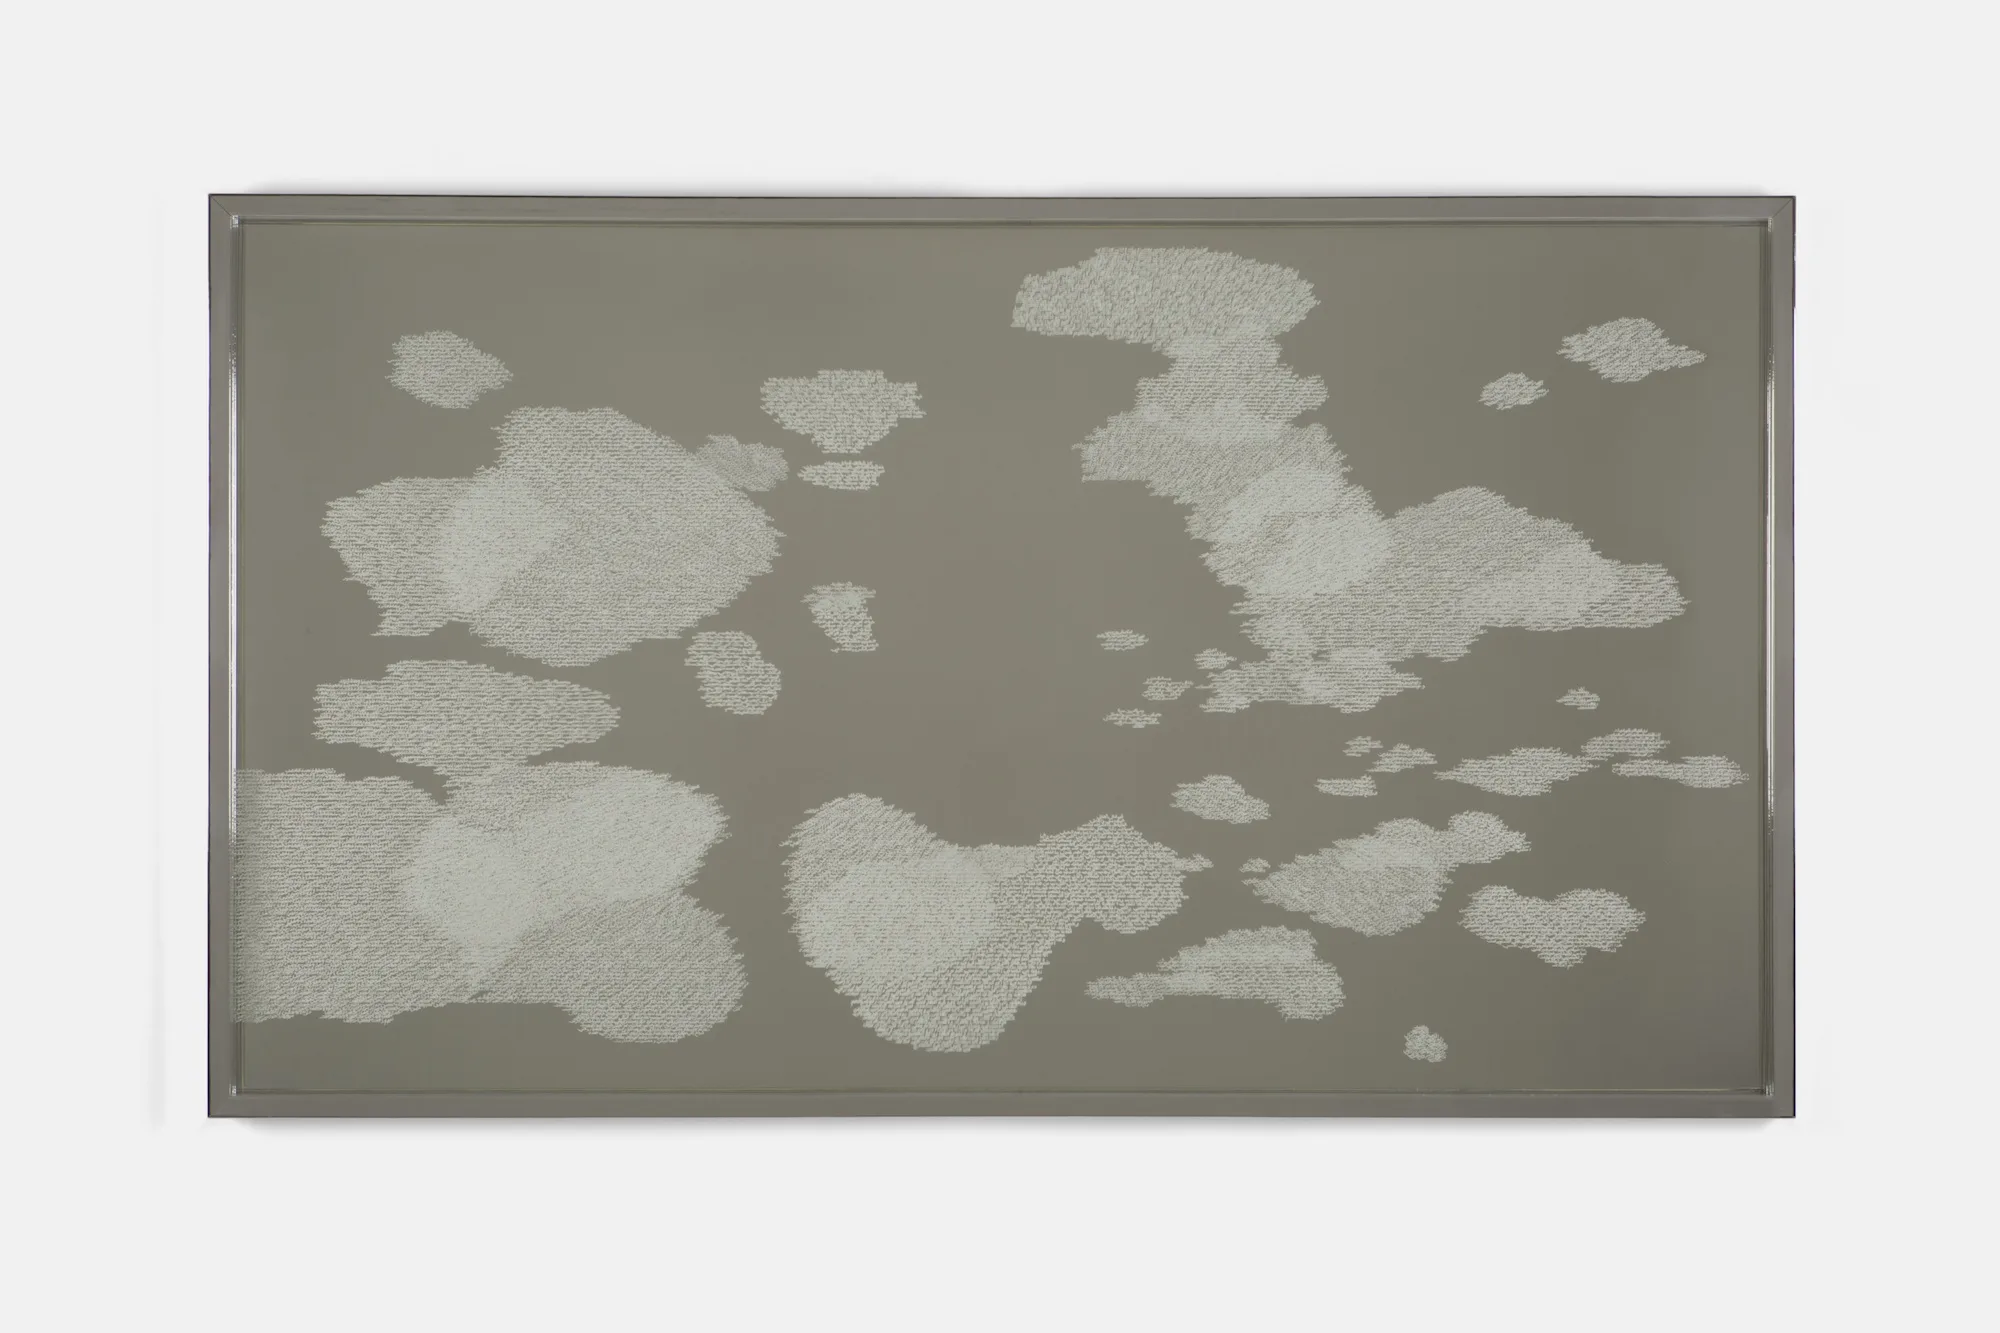 About the Artwork Nicène Kossentini Nuages, 2019 Ink on Glass and Mirror 84h X 144w Cm  by Nicène Kossentini